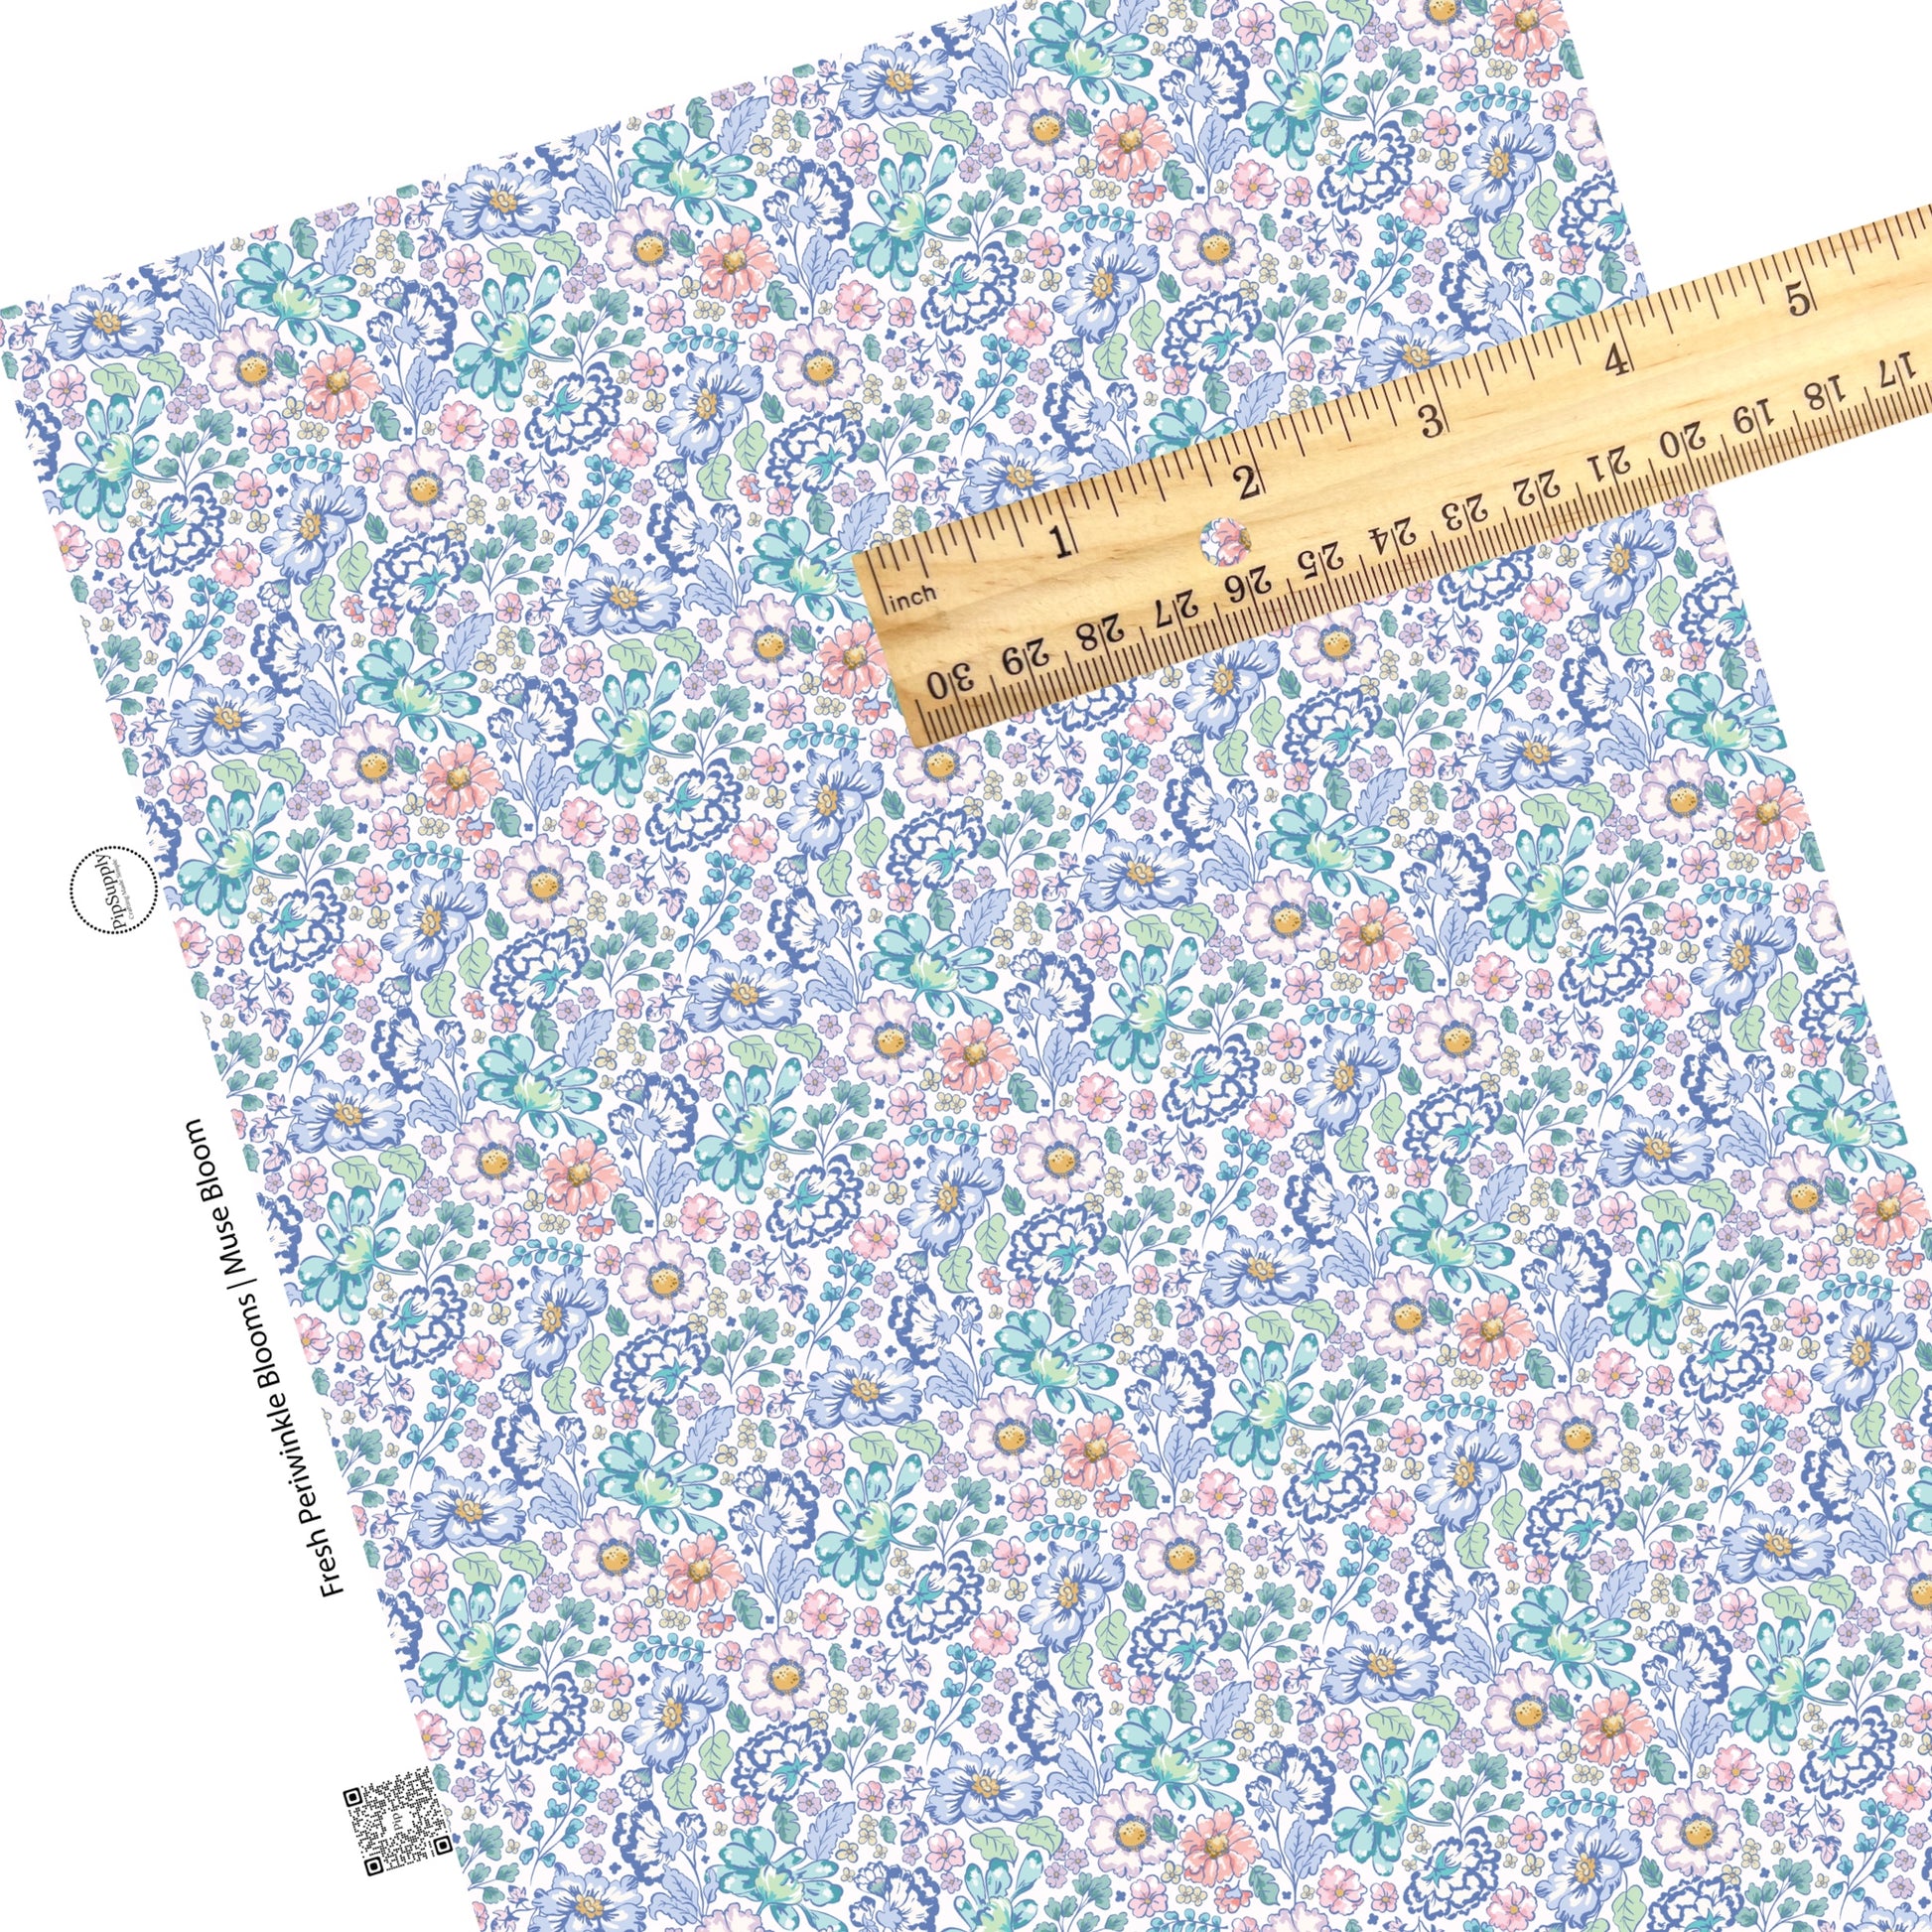 These floral themed cream faux leather sheets contain the following design elements: navy blue, light blue, teal, cream, light pink, yellow, and aqua flowers on cream. 